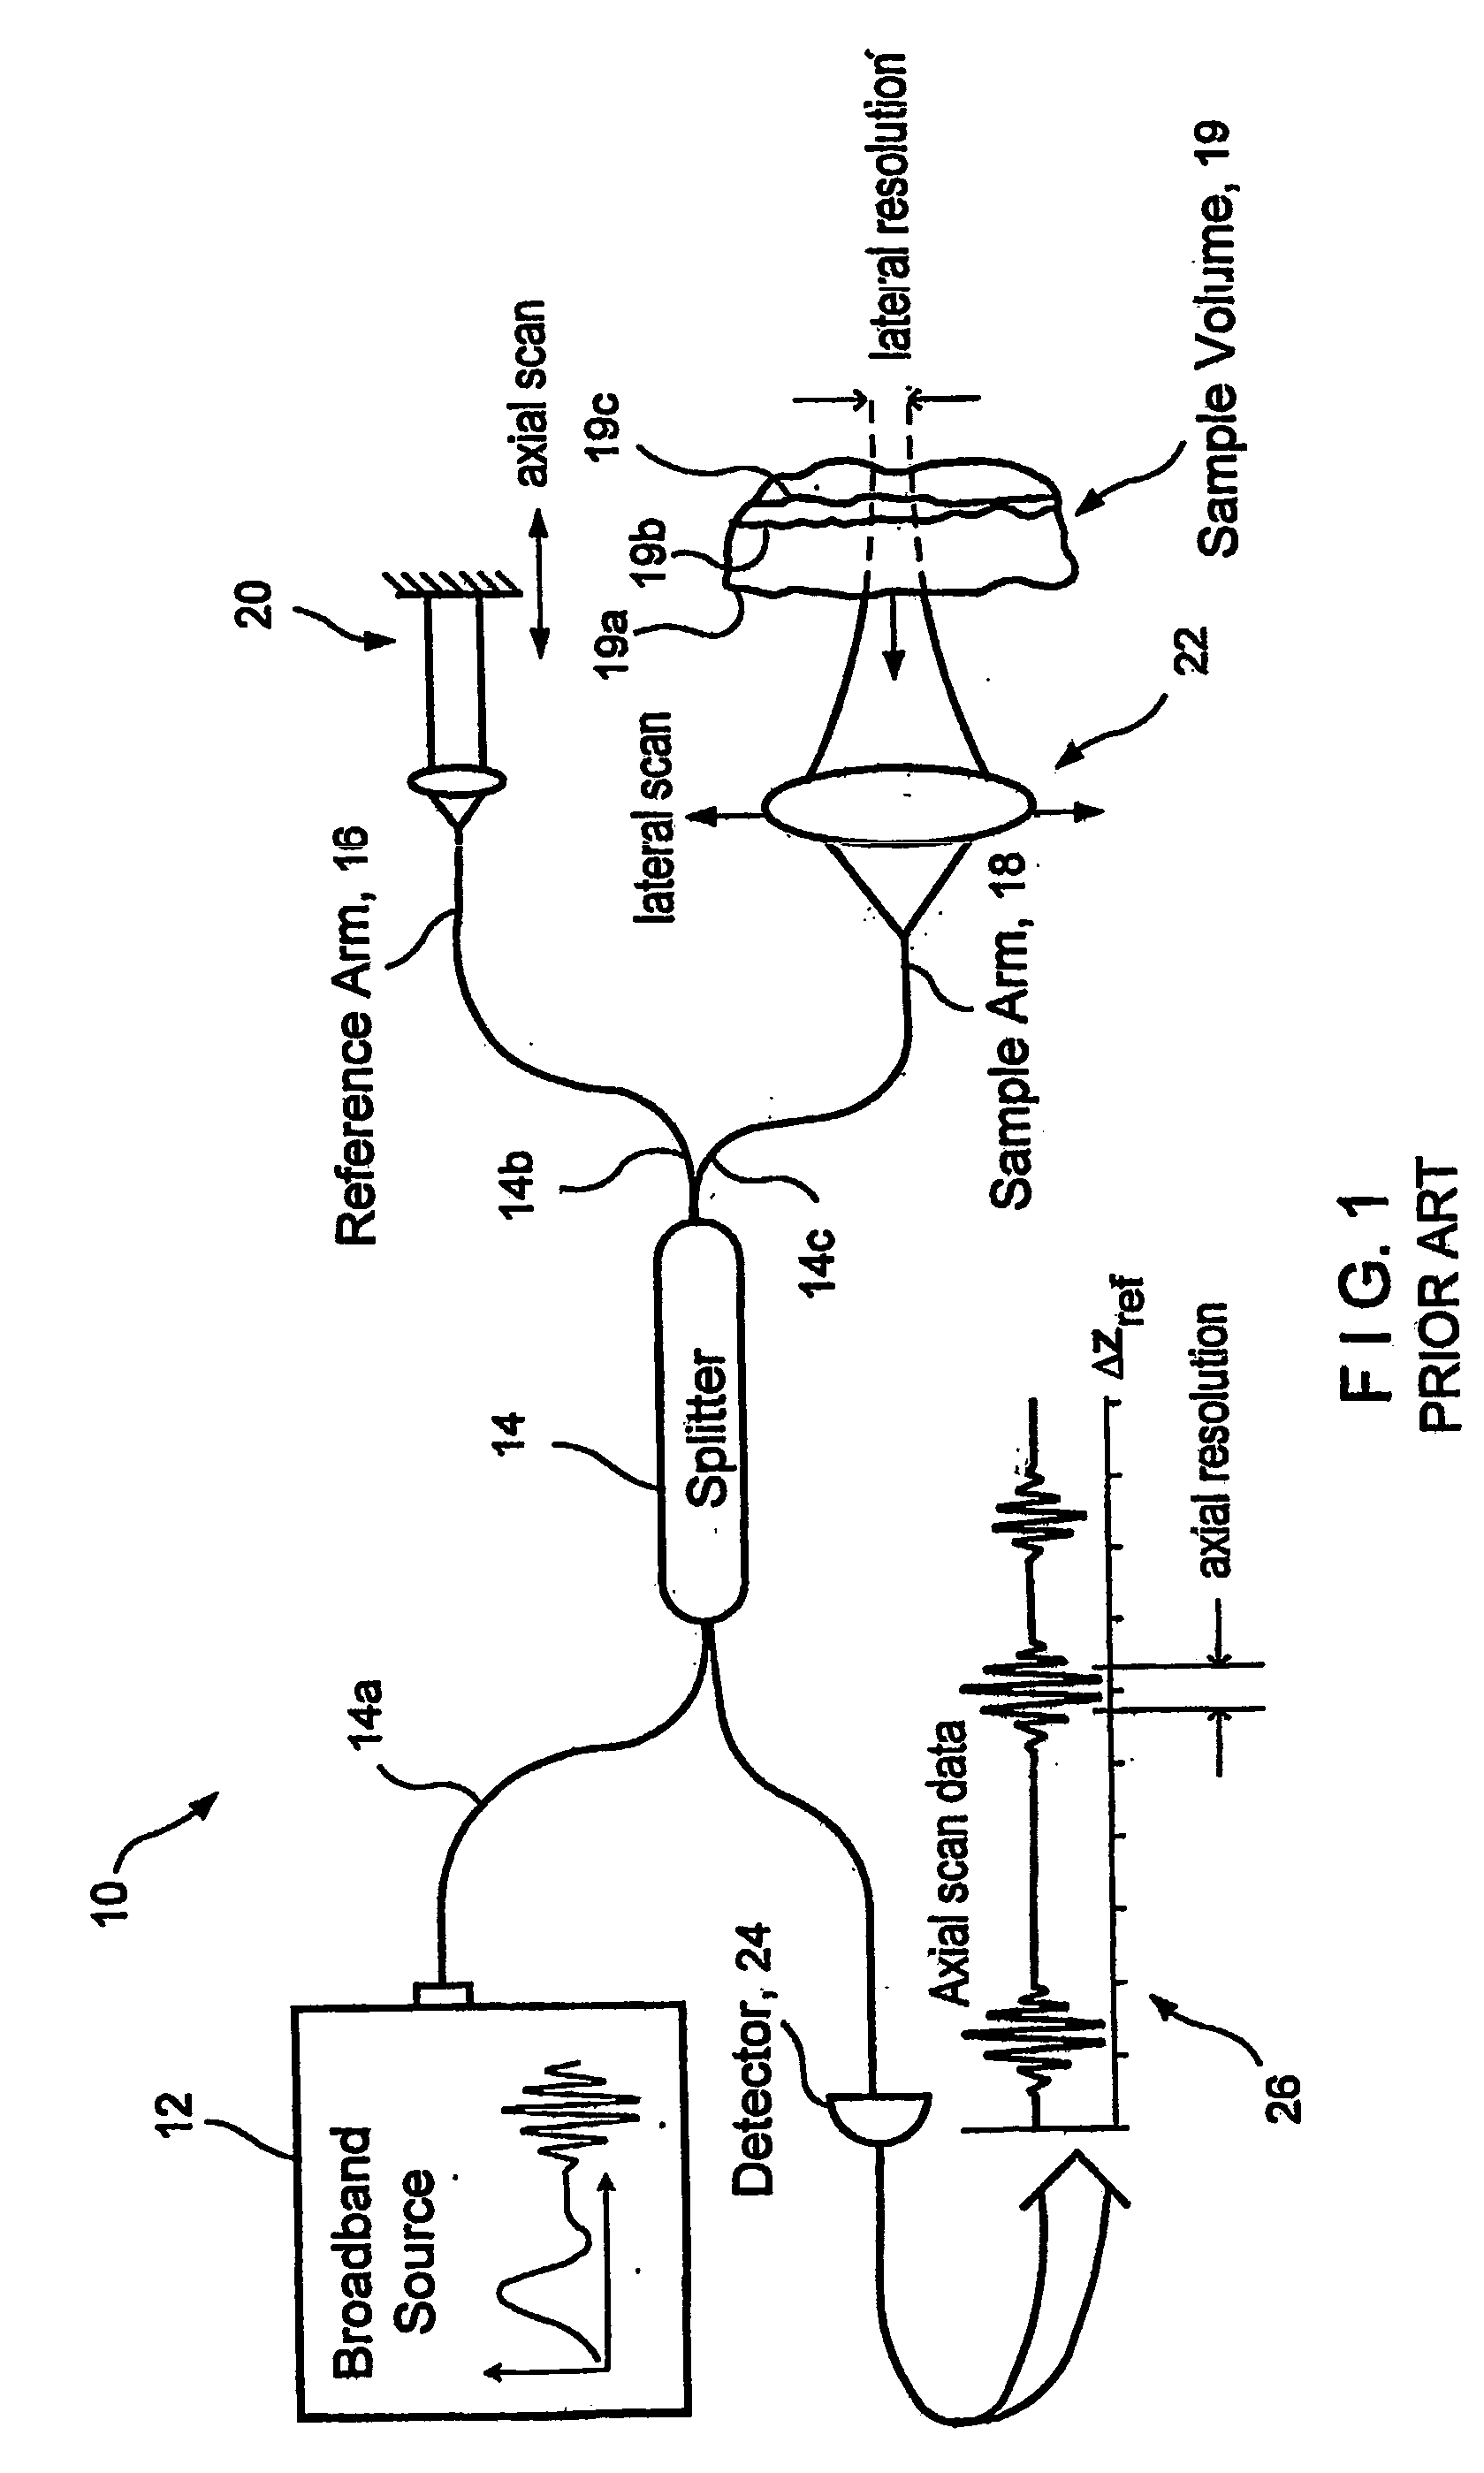 Method and apparatus for performing optical imaging using frequency-domain interferometry